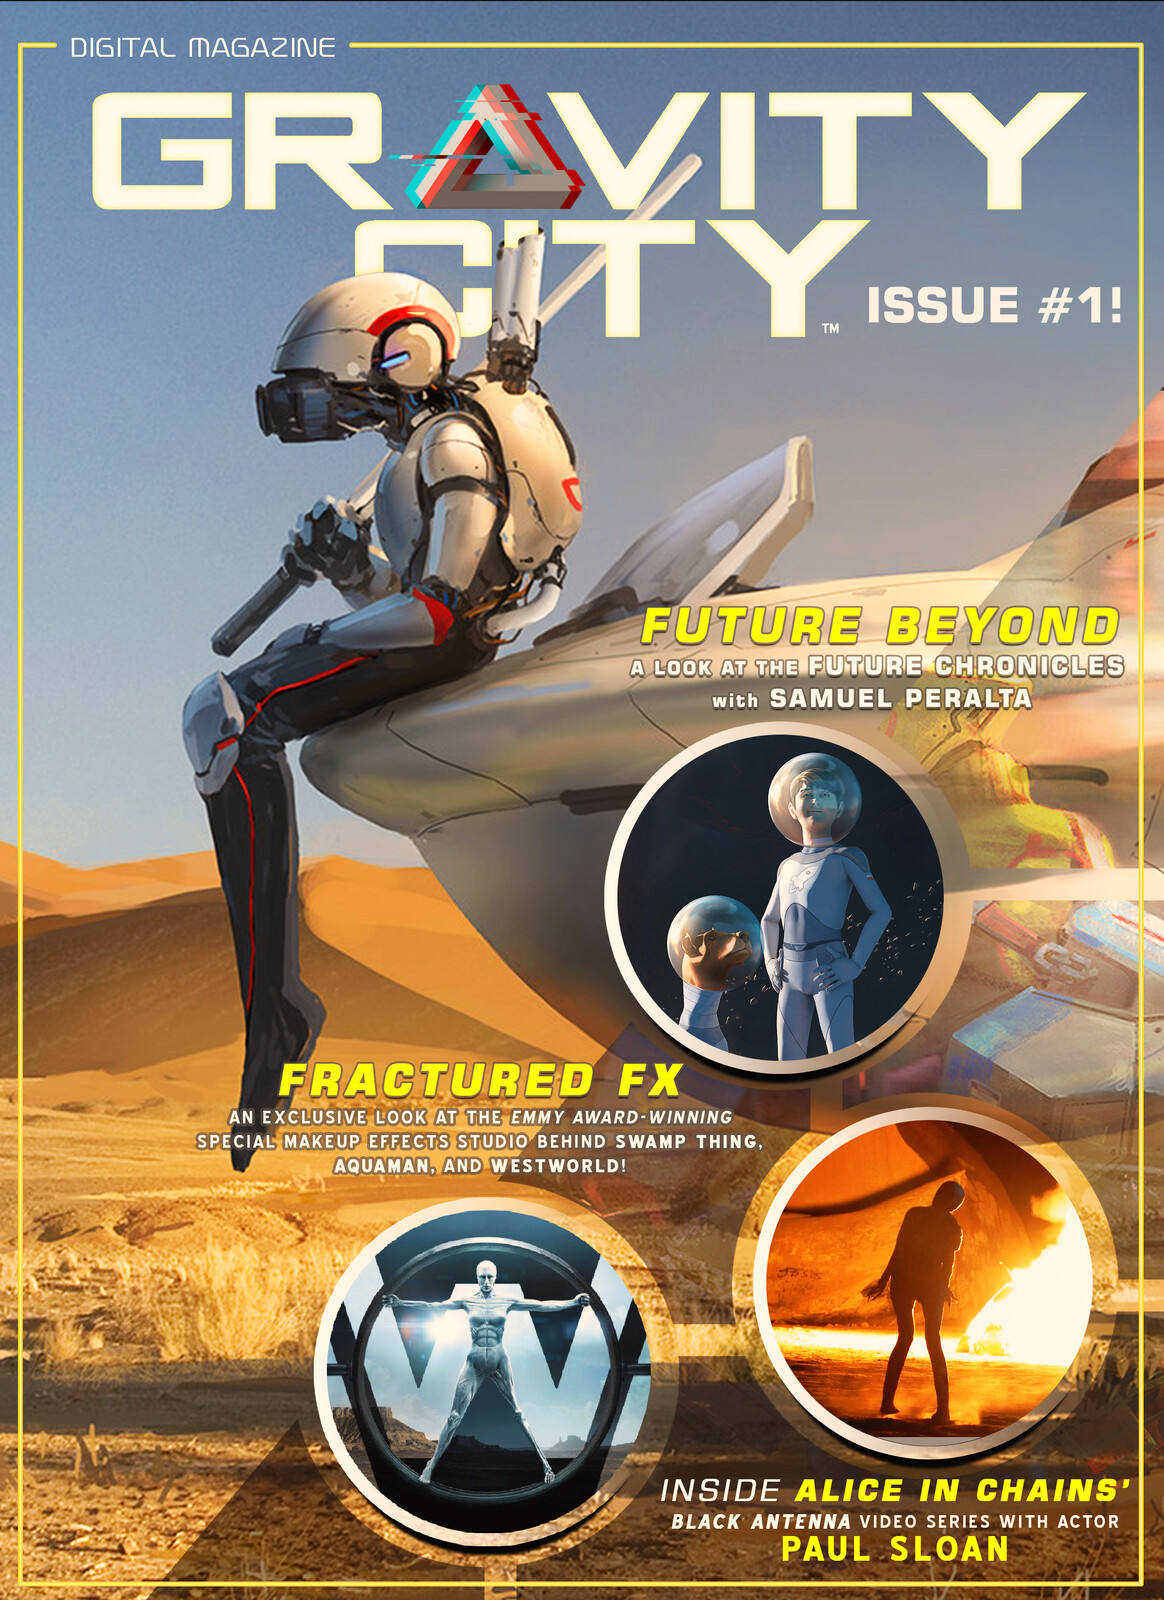 Gravity City Digital-Magazine is a new science fiction fanzine featuring collections of sci-fi fiction, non-fiction, and digital art.
Read for free here - www.gravitycitynews.com/magazine